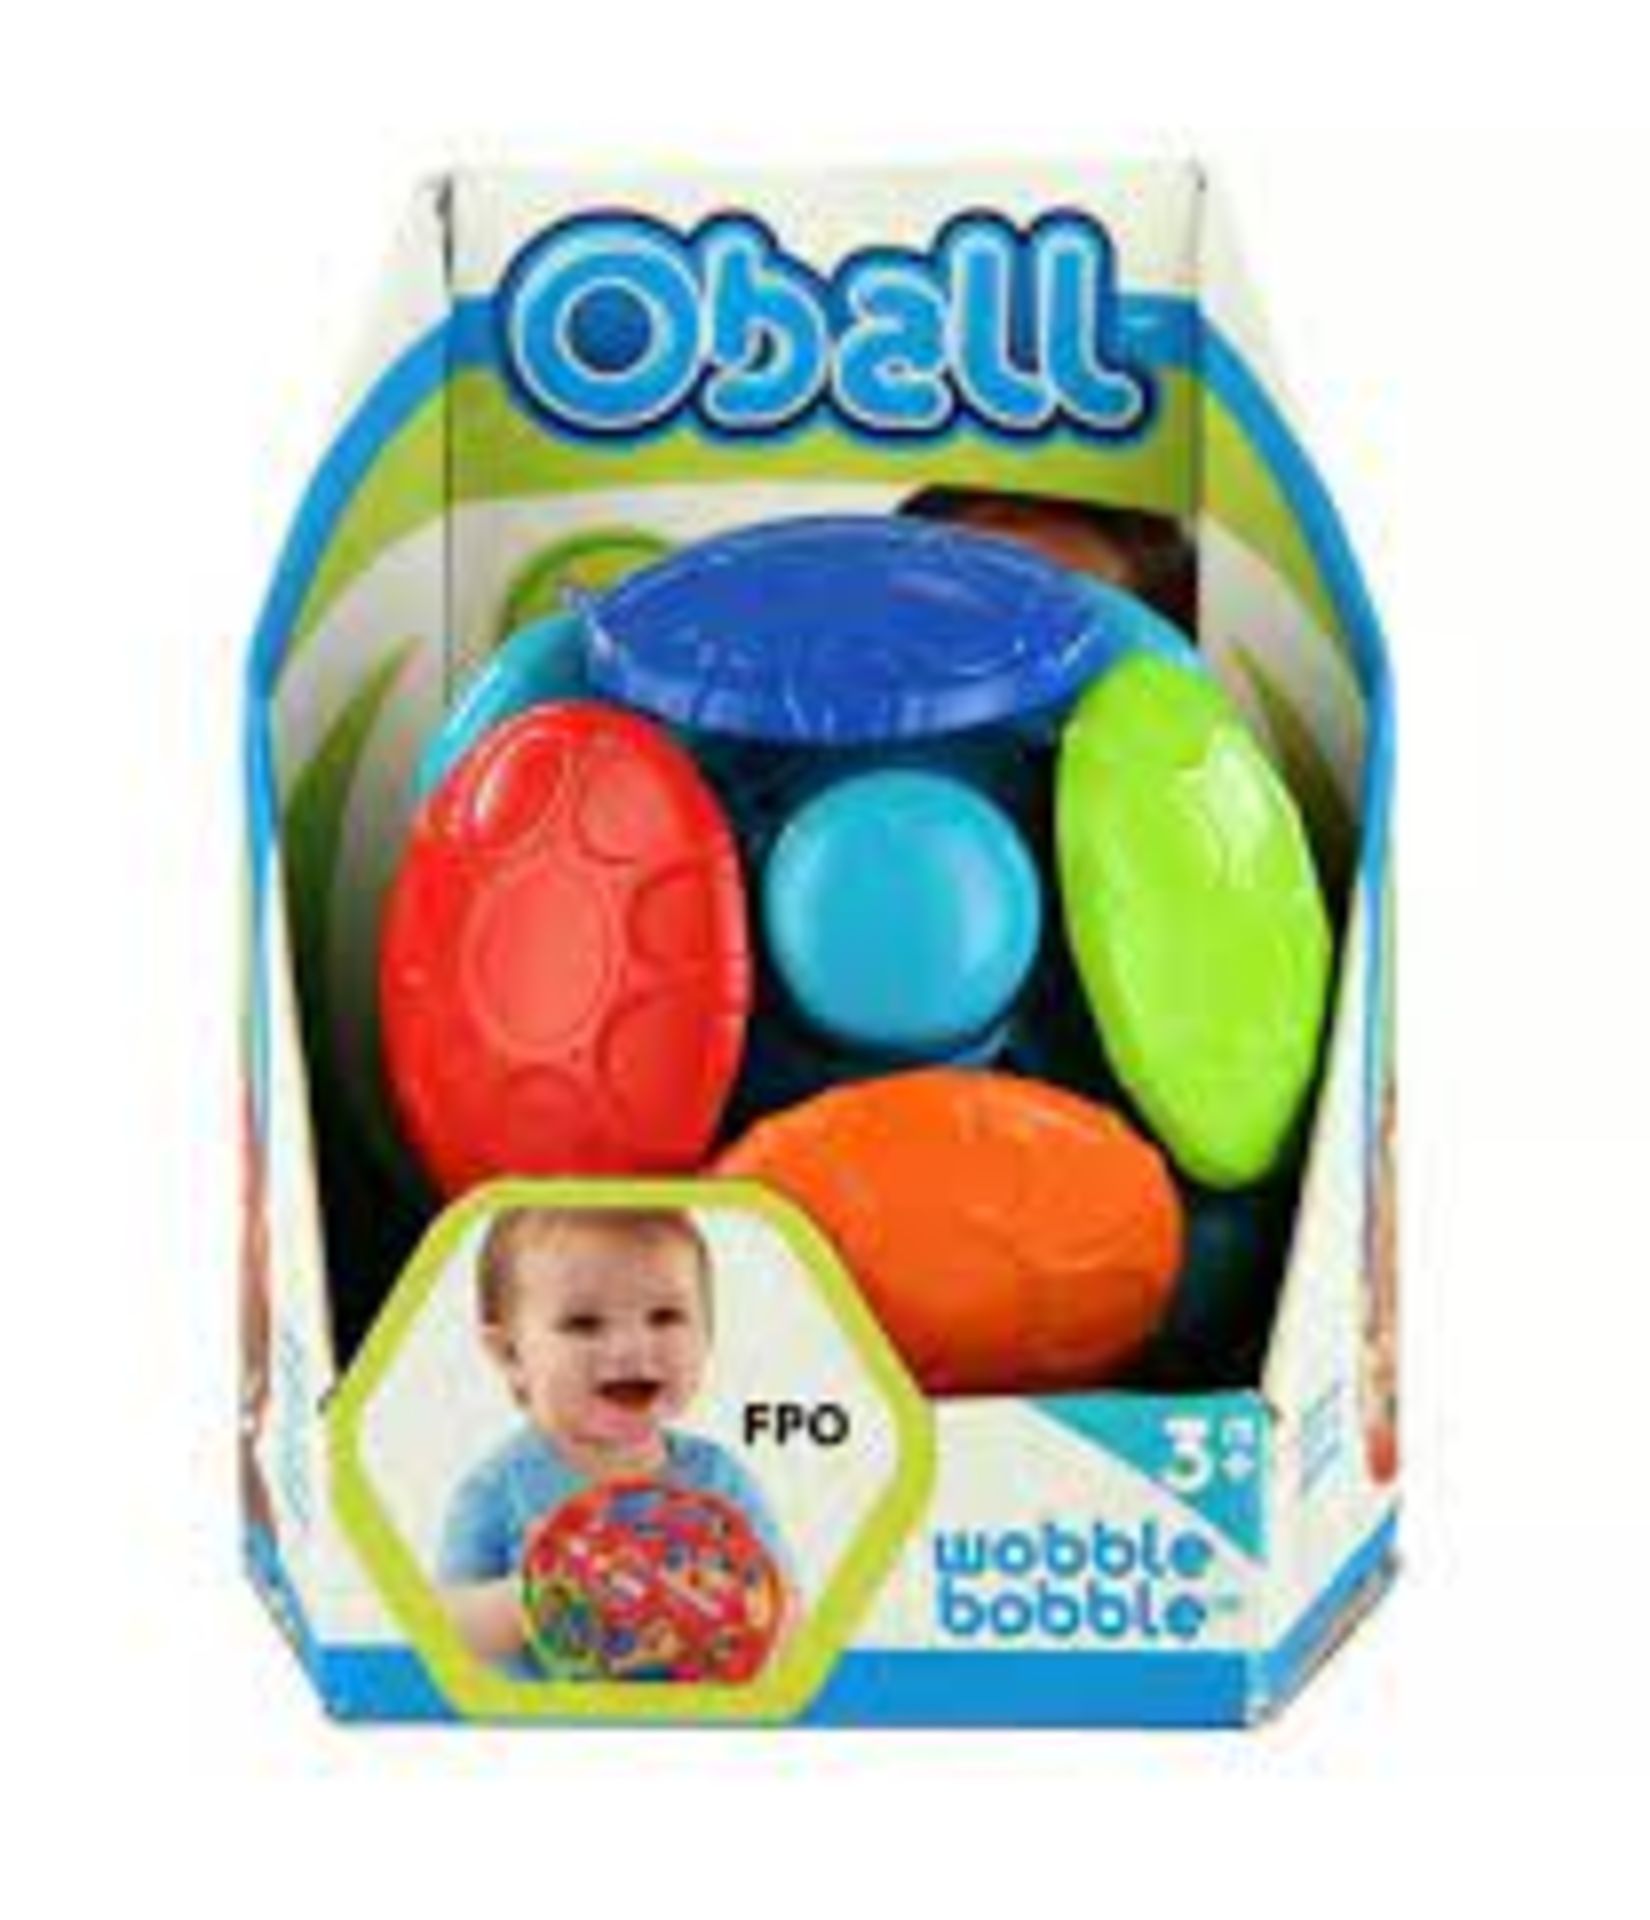 PALLET TO CONTAIN 72 X BRAND NEW OBALL WOBBLE BOBBLE EDUCATIONAL TOYS. ROW 5